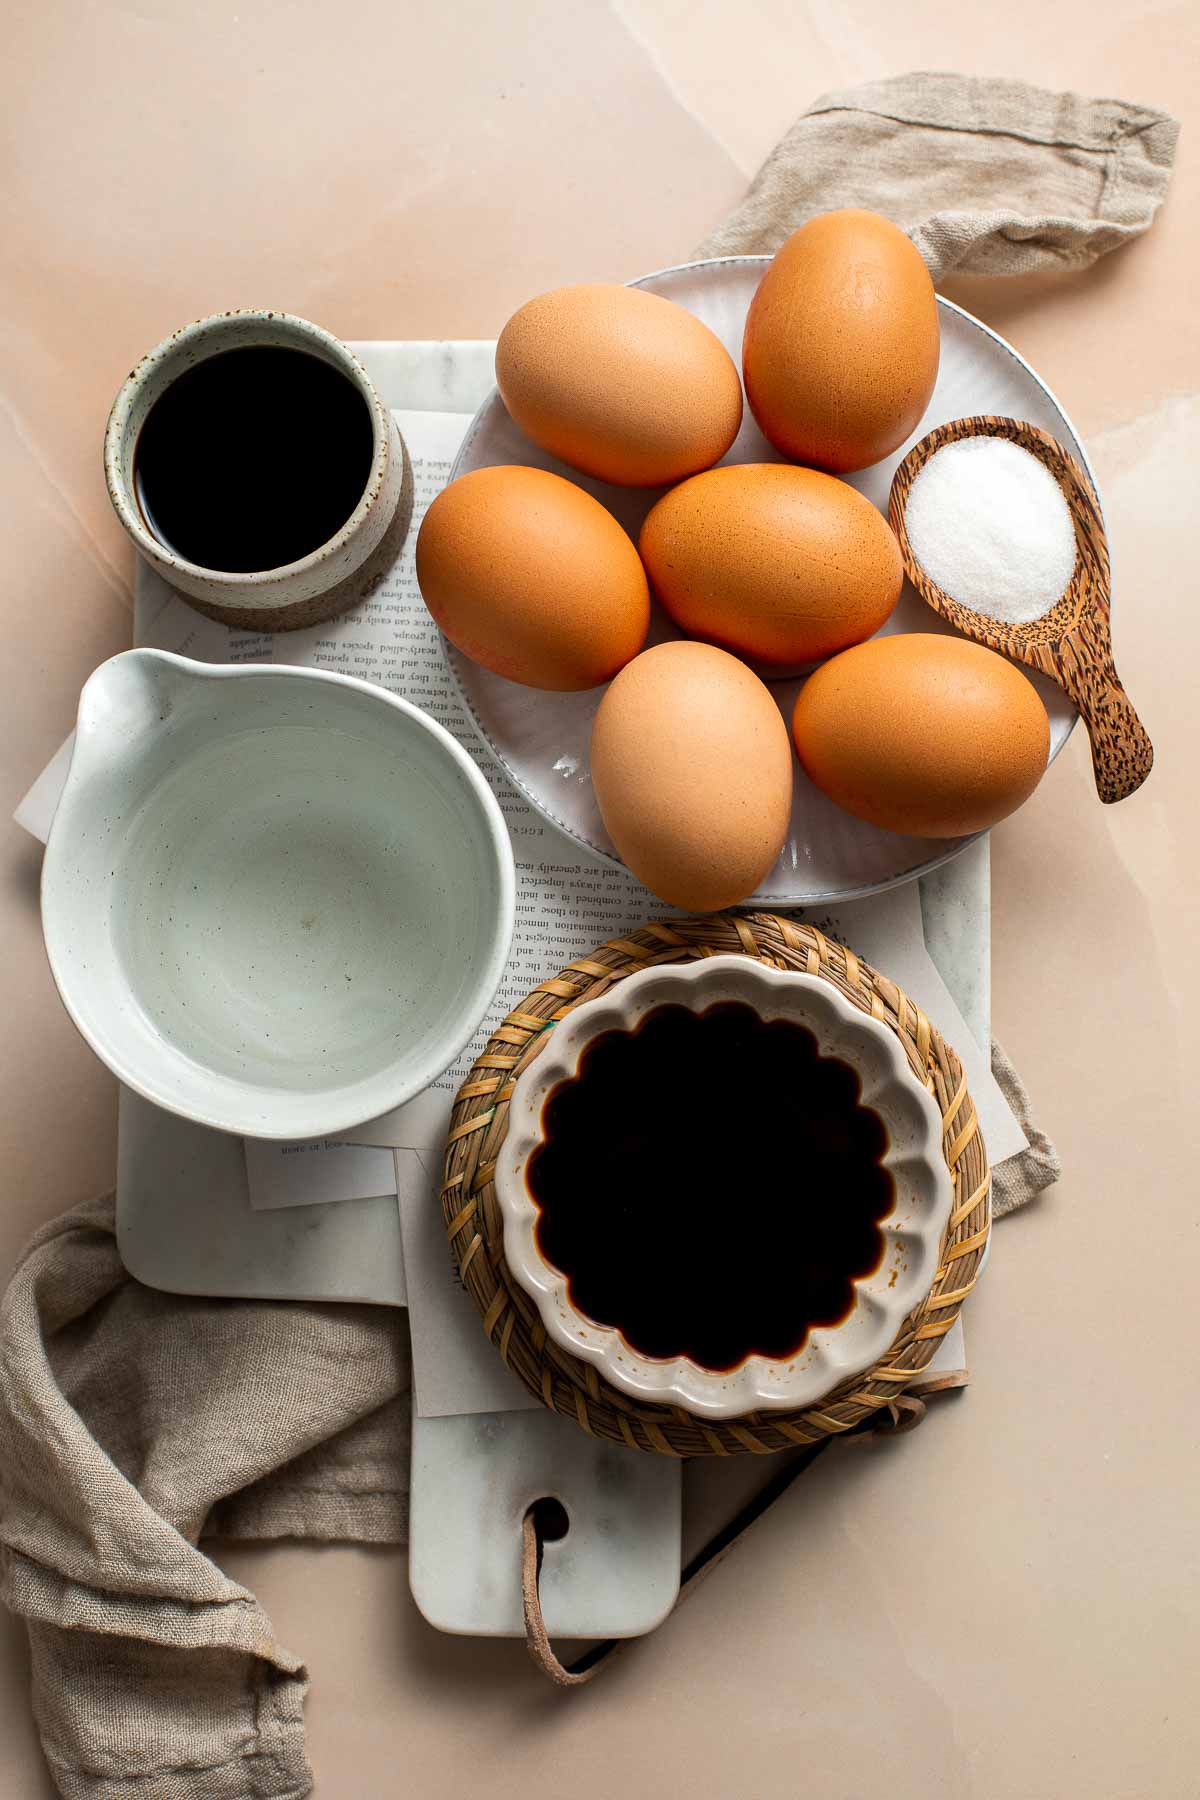 Soy Sauce Eggs (Ramen Eggs) are umami with a firm white and jammy center. The salty, savory flavor is easy to make with a simple 4-ingredient marinade. | aheadofthyme.com